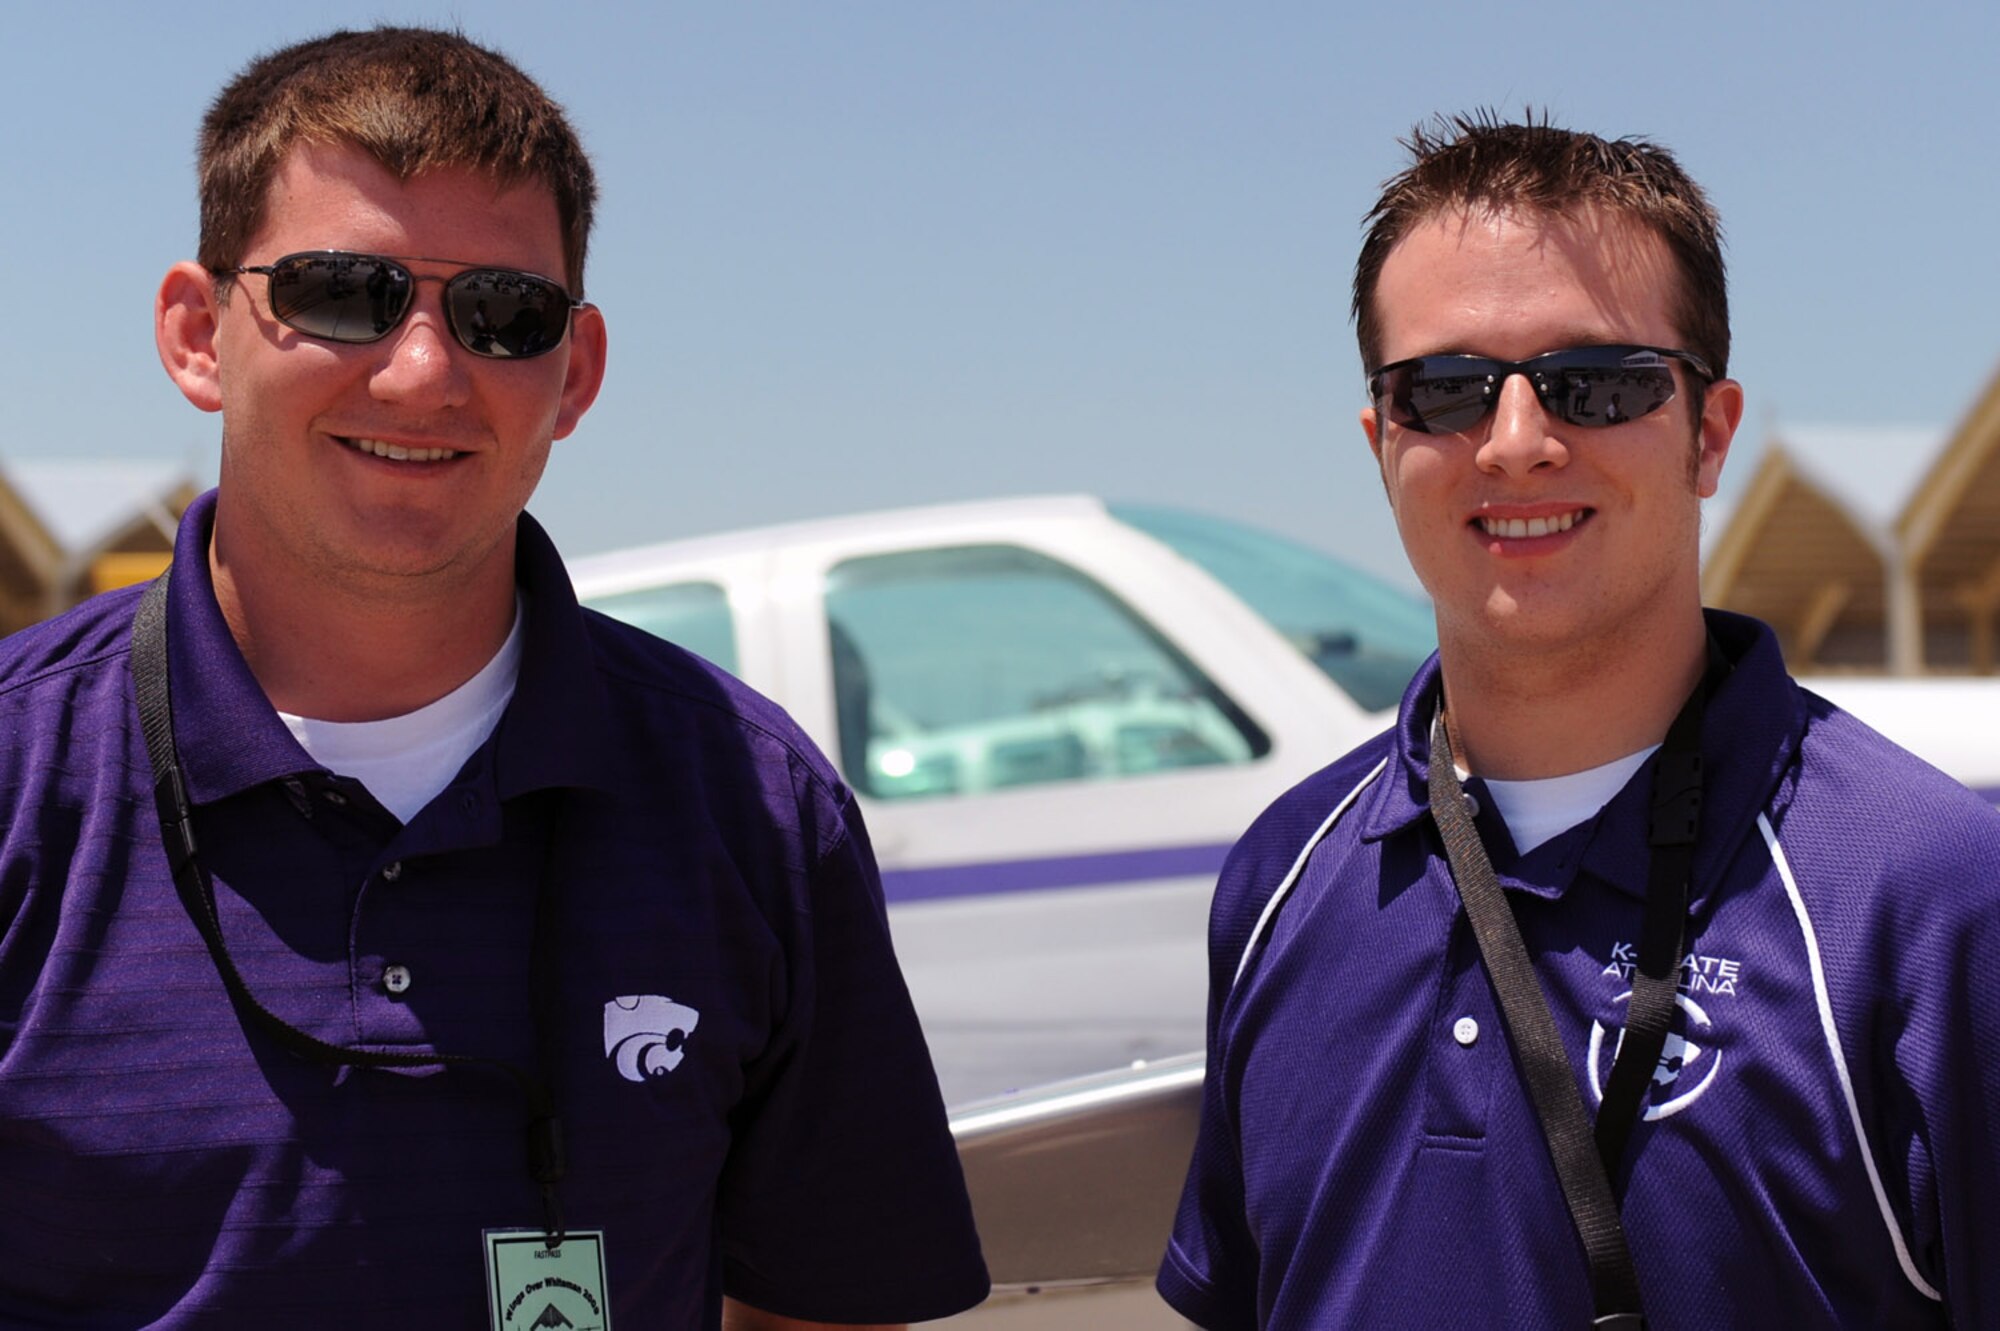 WARRENSBURG, Mo. - Dan Bergman and Danny Sheehy from the Kansas State Aviation program pose in front of their school’s aircraft during the Wings Over Whiteman Air Show and Open House June 6. Another college aviation program at the air show Saturday, the University of Central of Missouri, is based in Warrensburg, Mo. (U.S. Air Force photo/Senior Airman Jason Huddleston)